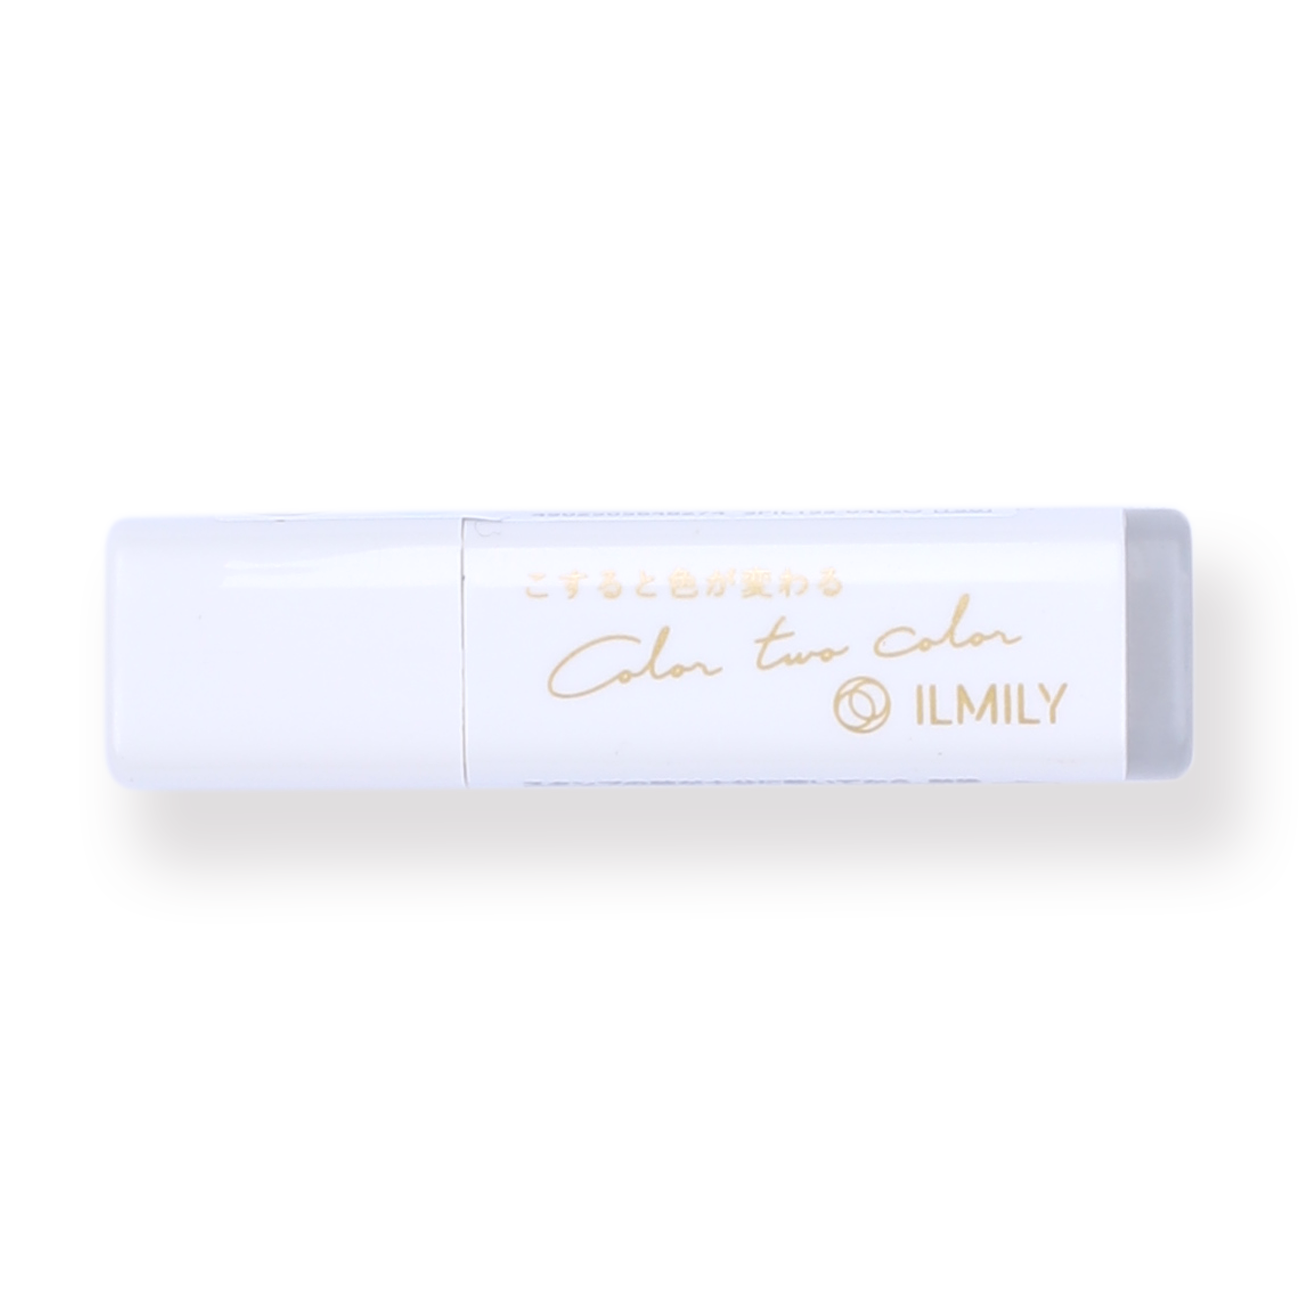 Pilot ILMILY Limited Edition Erasable Stamp - Movie - Stationery Pal